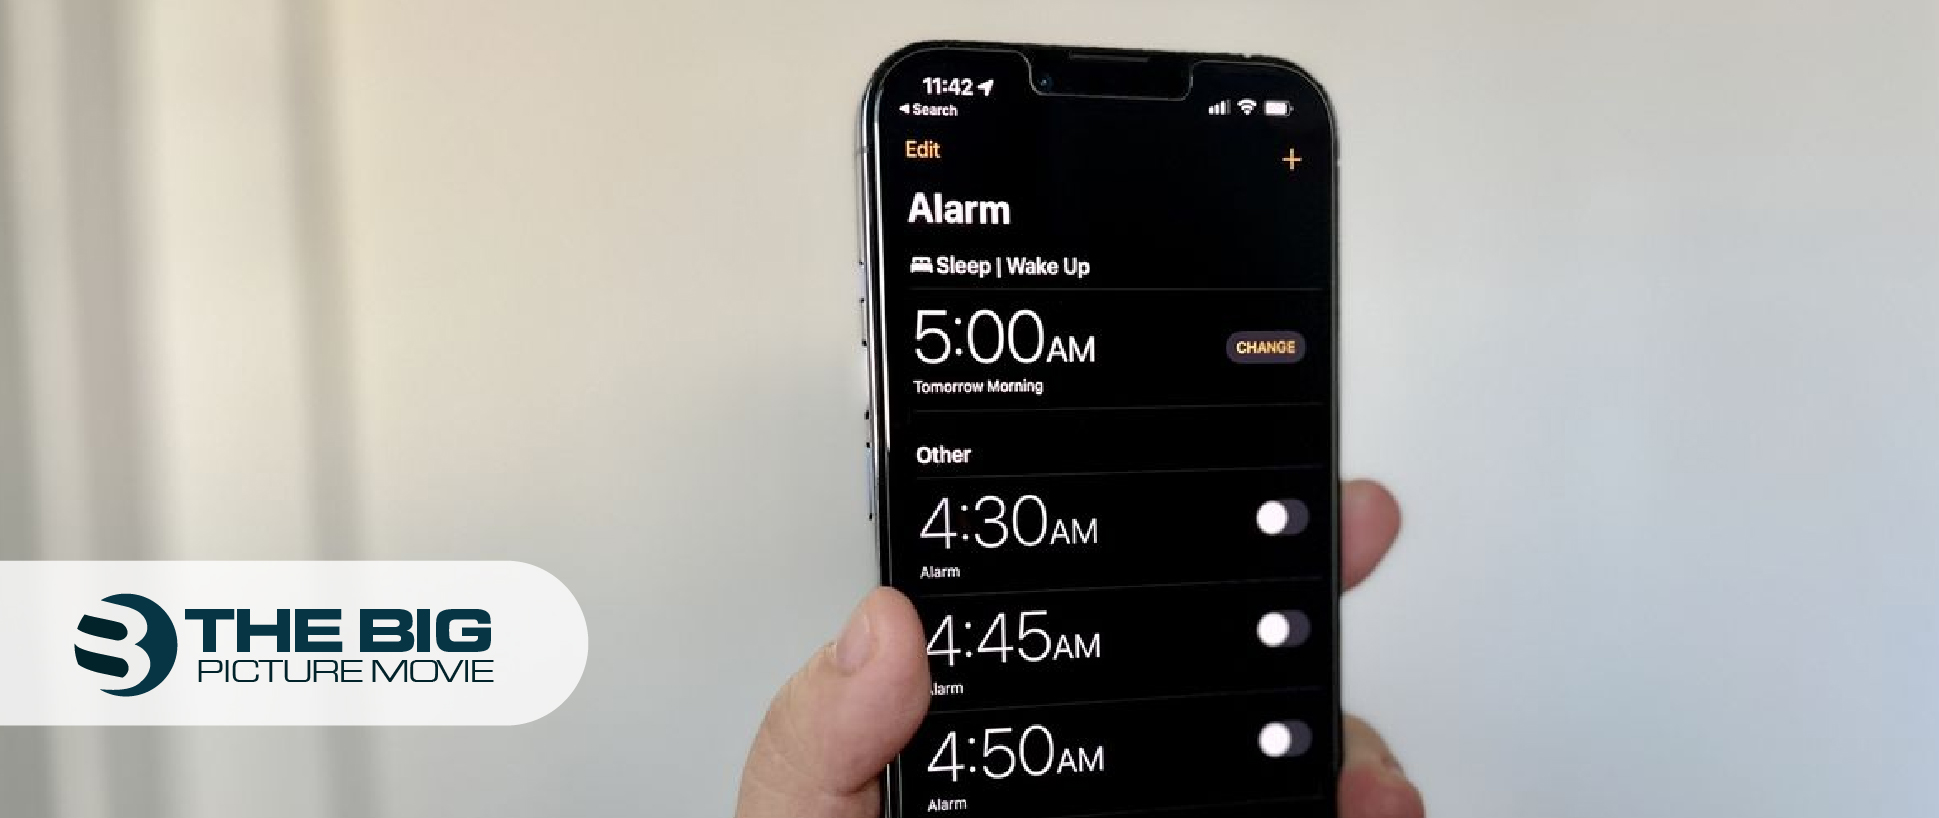 How to Change Alarm Sound on iPhone to Wake Me Up